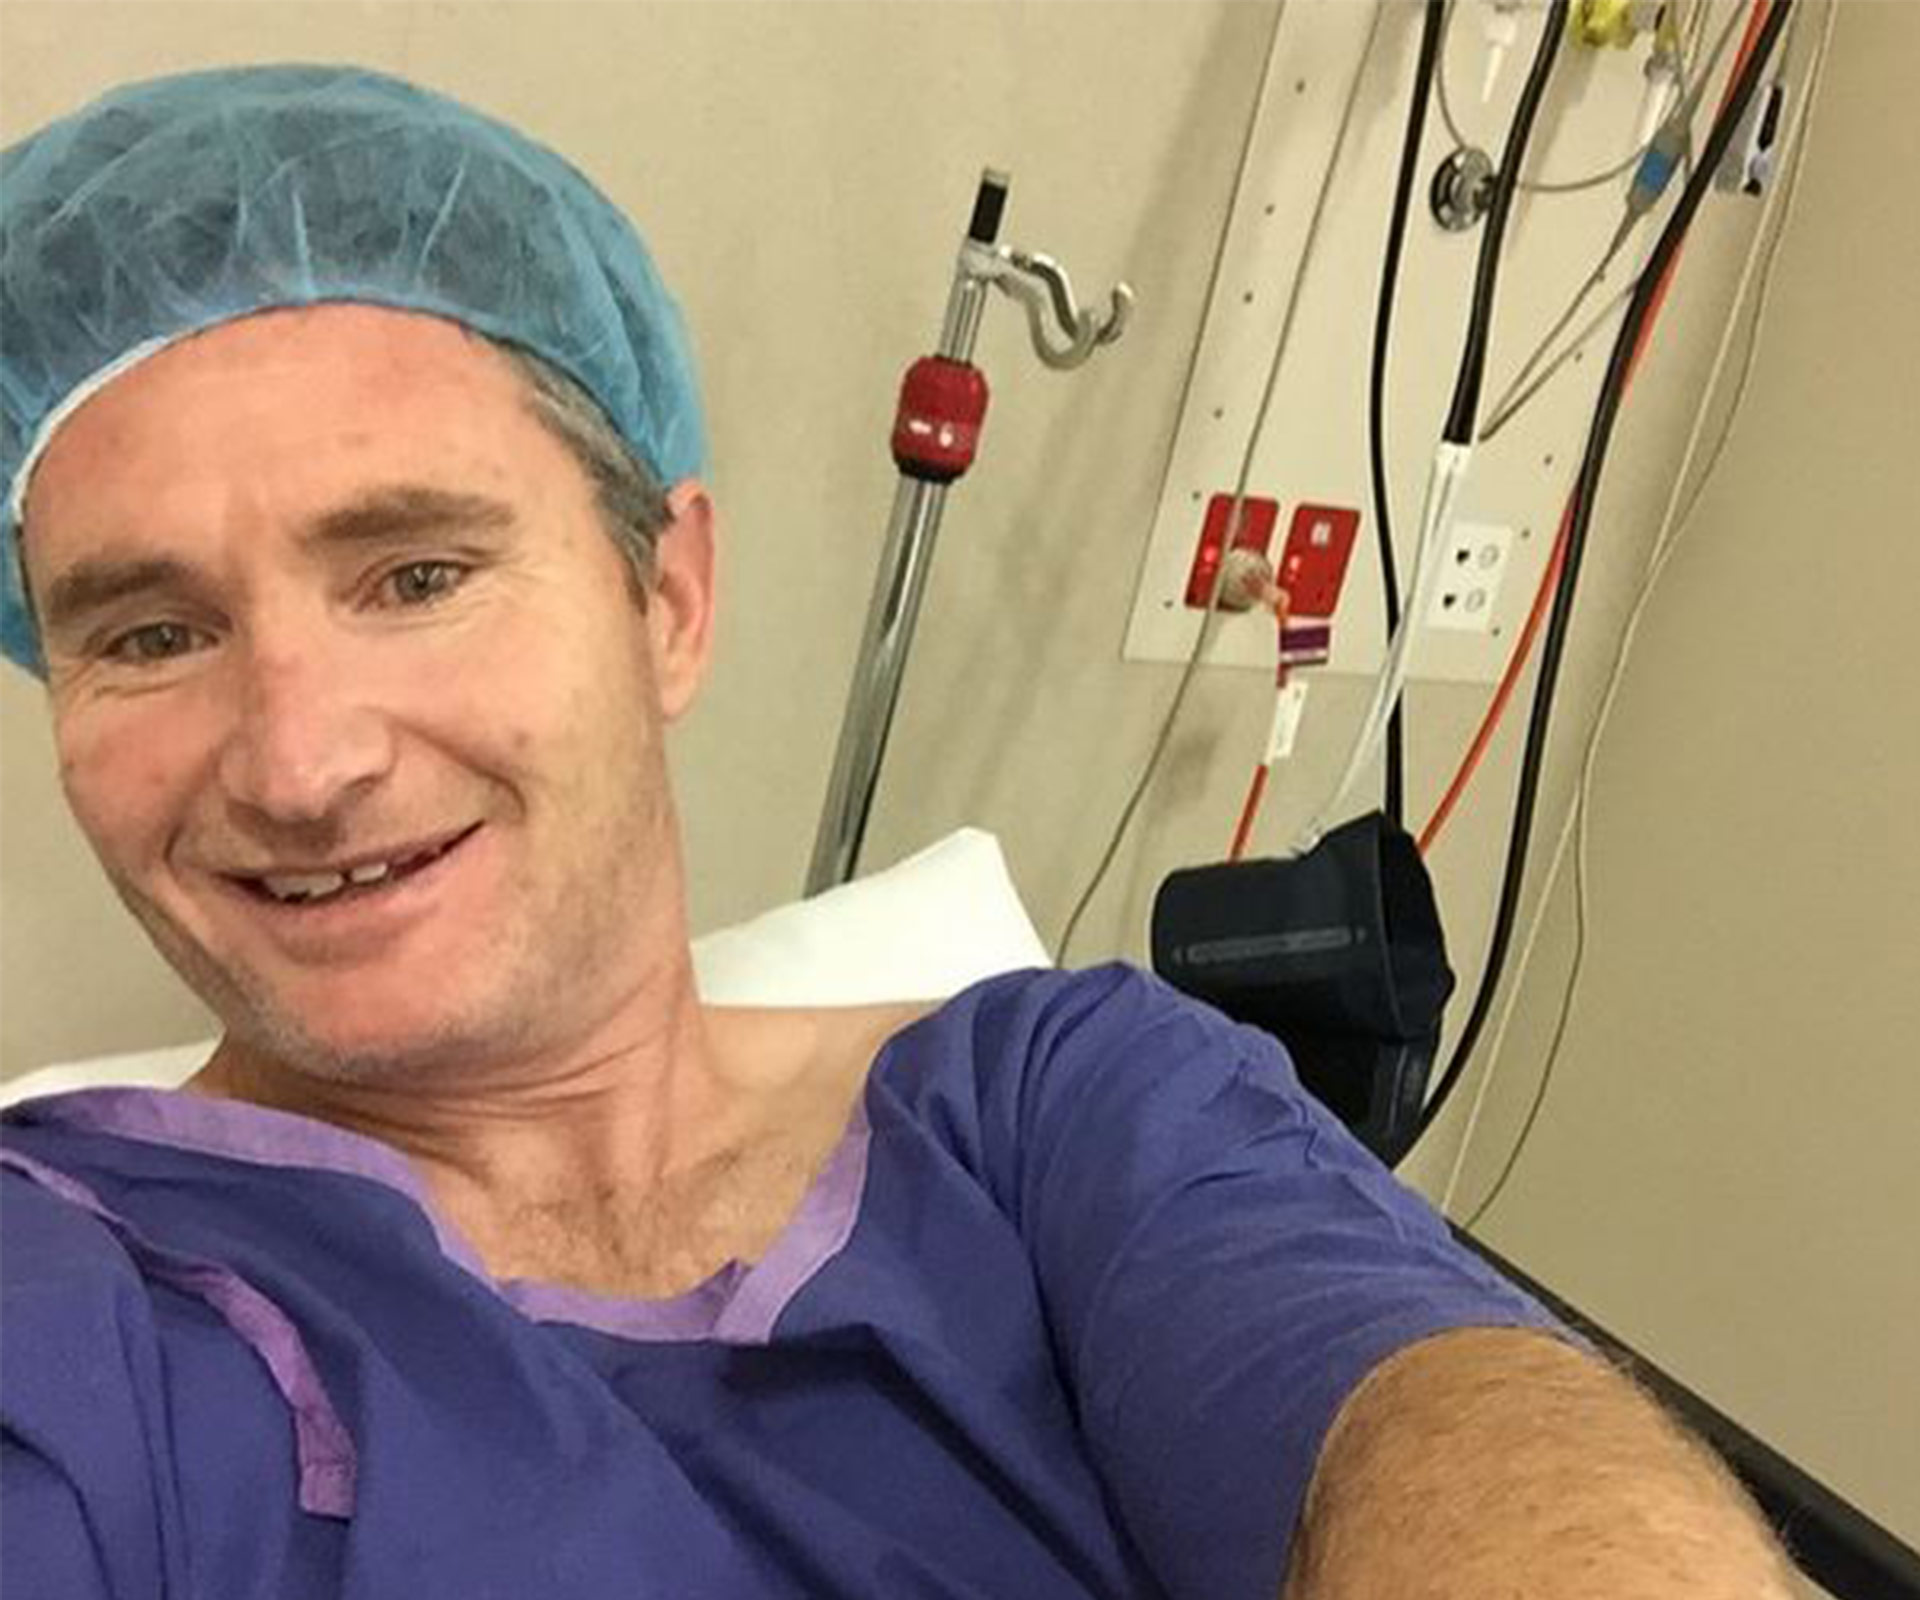 “Hey ho let’s go!” Dave Hughes posts a selfie from hospital bed ahead of his vasectomy